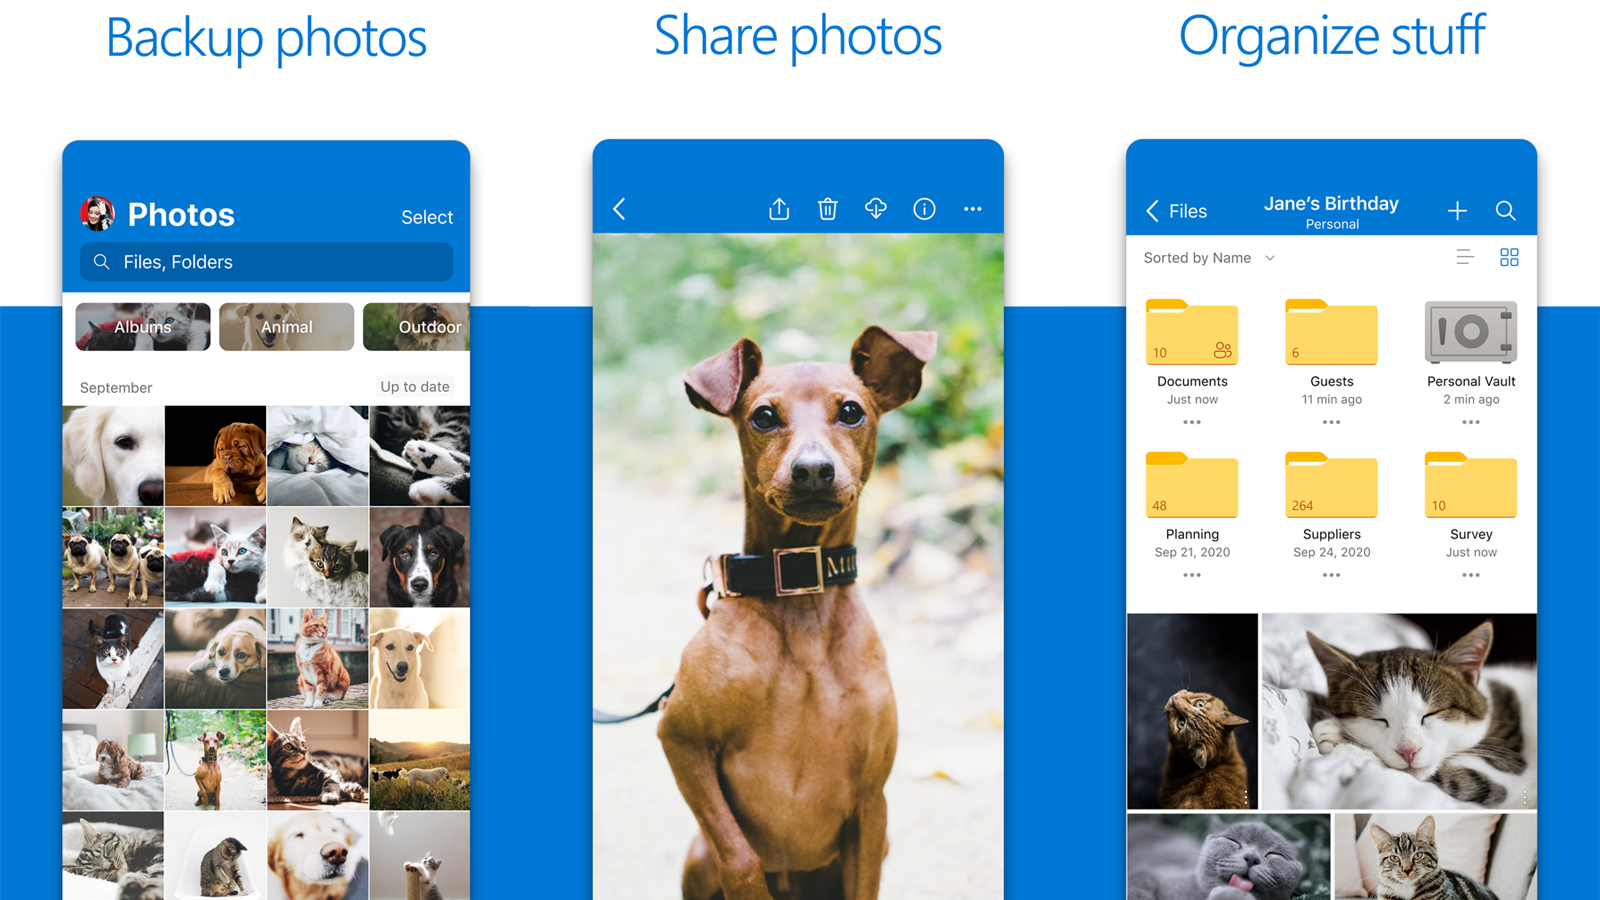 Microsoft OneDrive app for storing, backing up, sharing, and organizing your photos